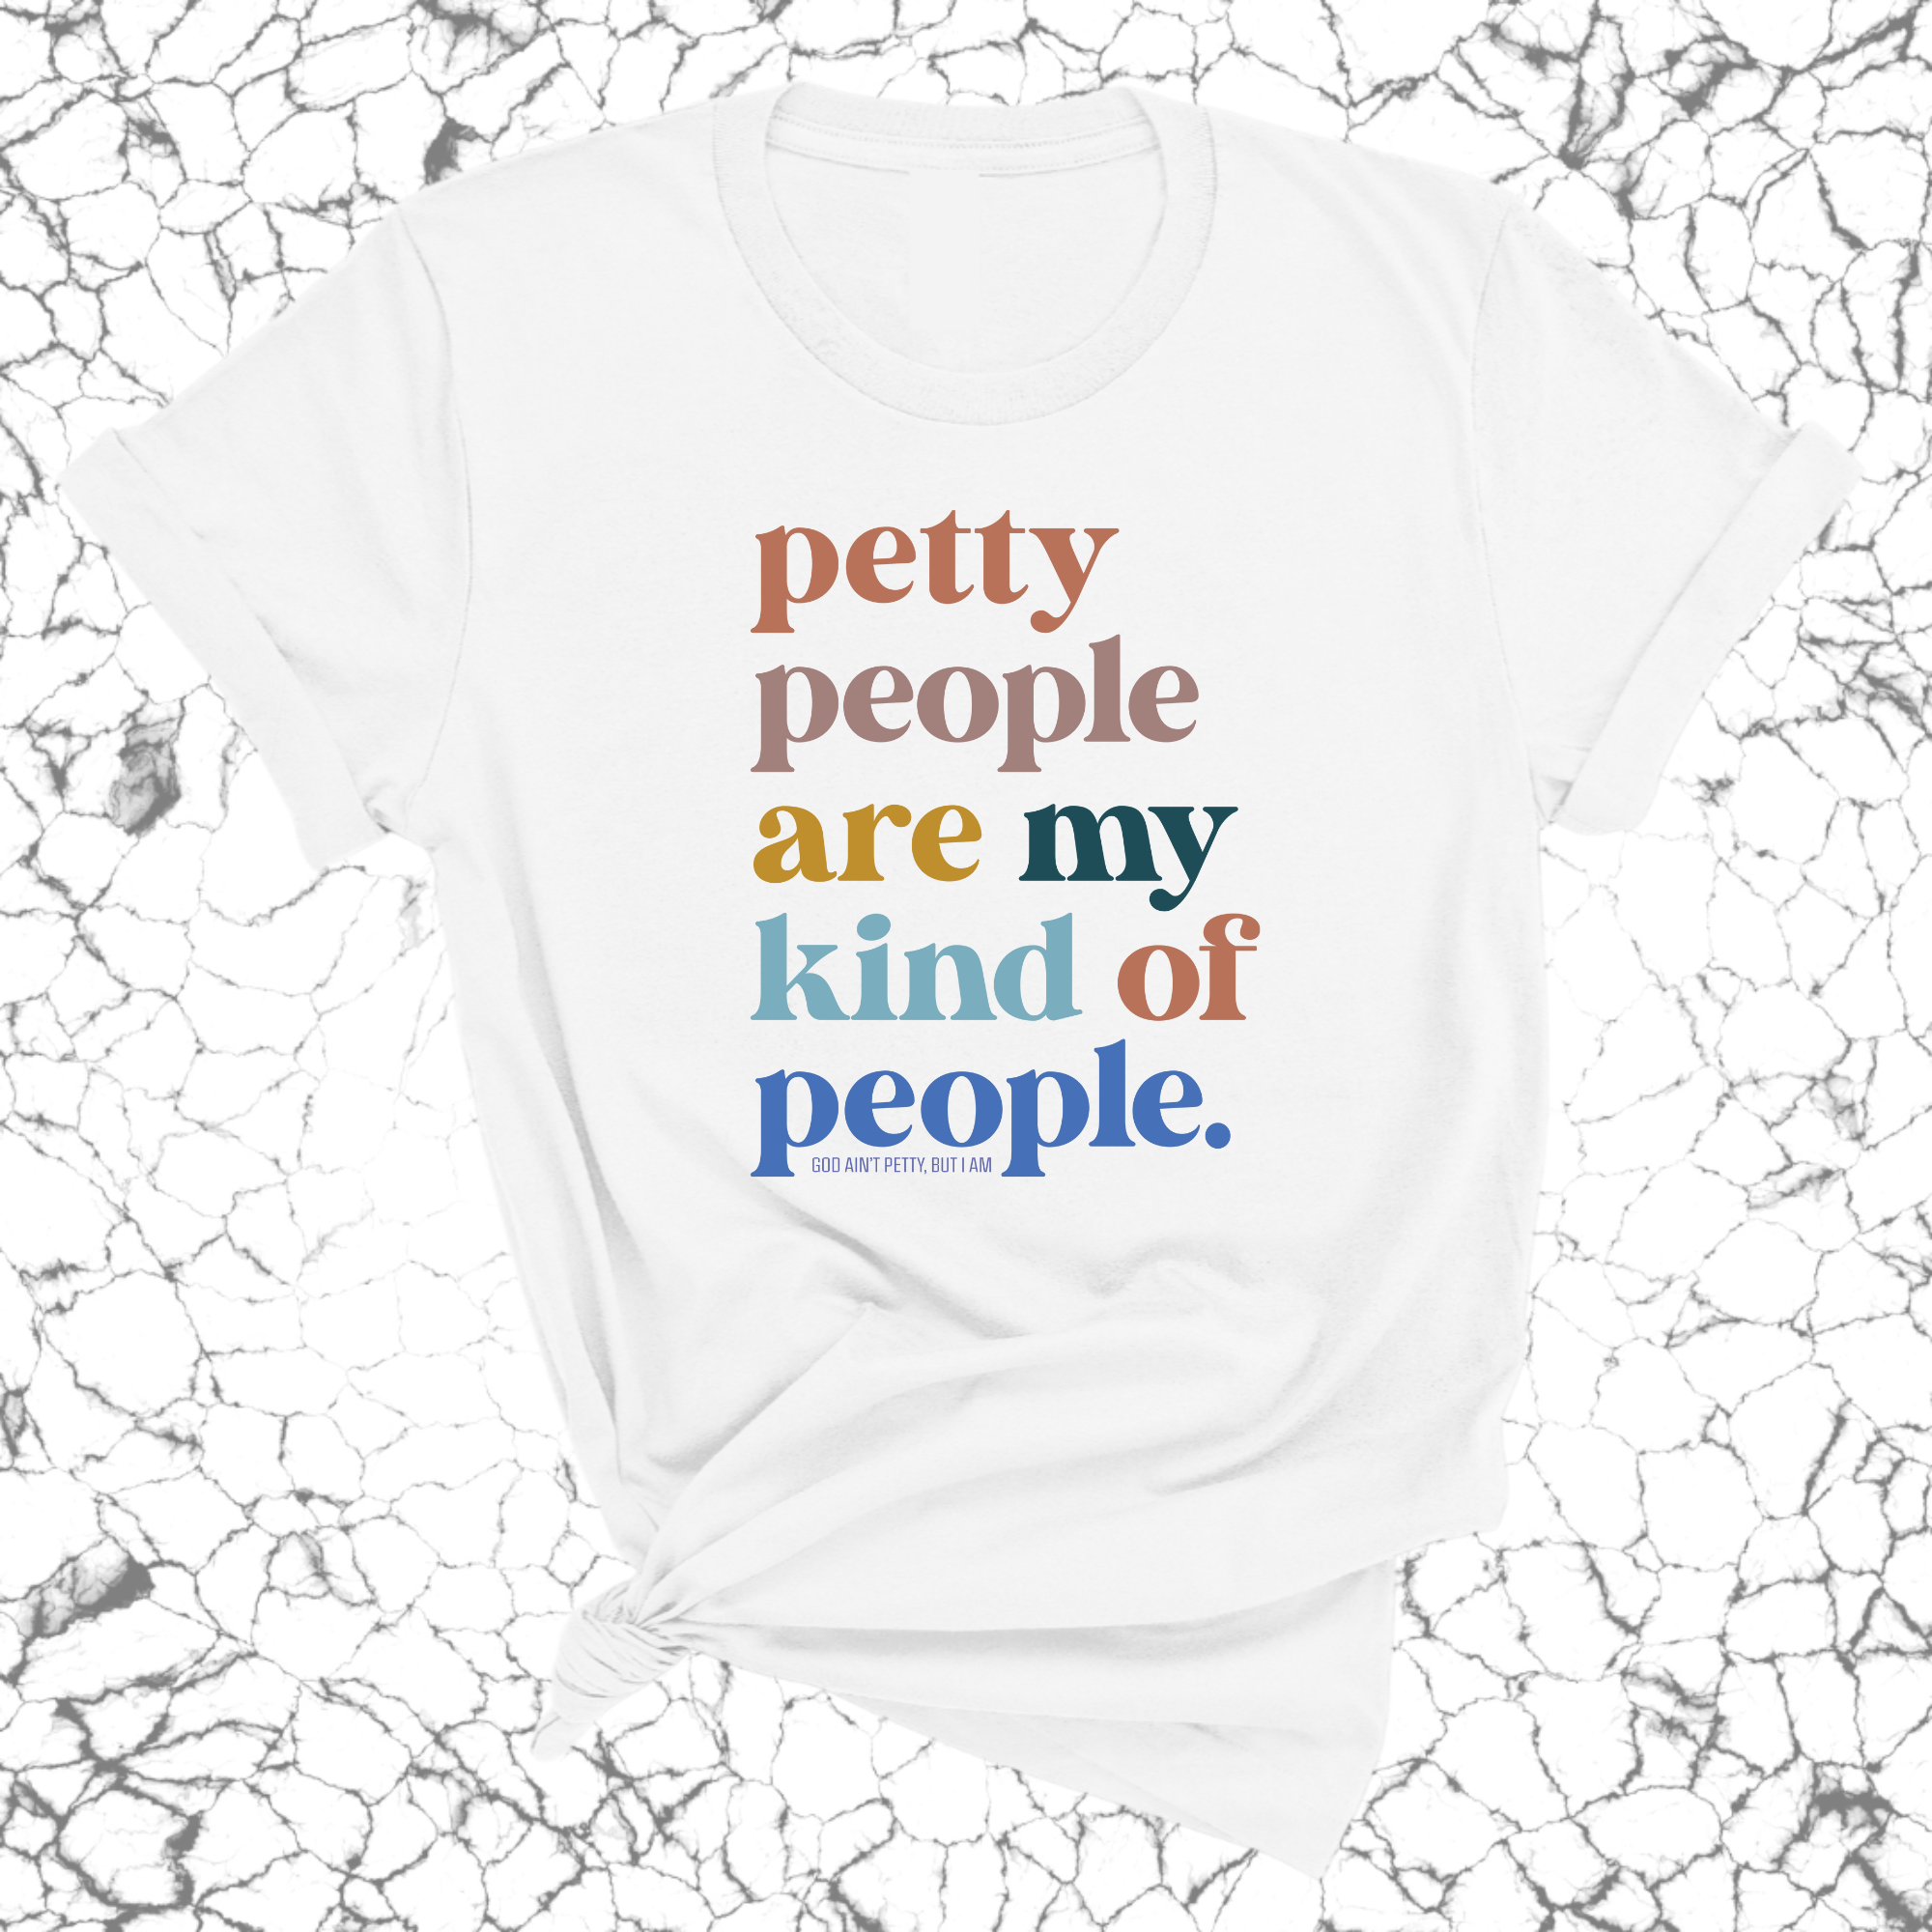 Petty People are my kind of People Unisex Tee-T-Shirt-The Original God Ain't Petty But I Am